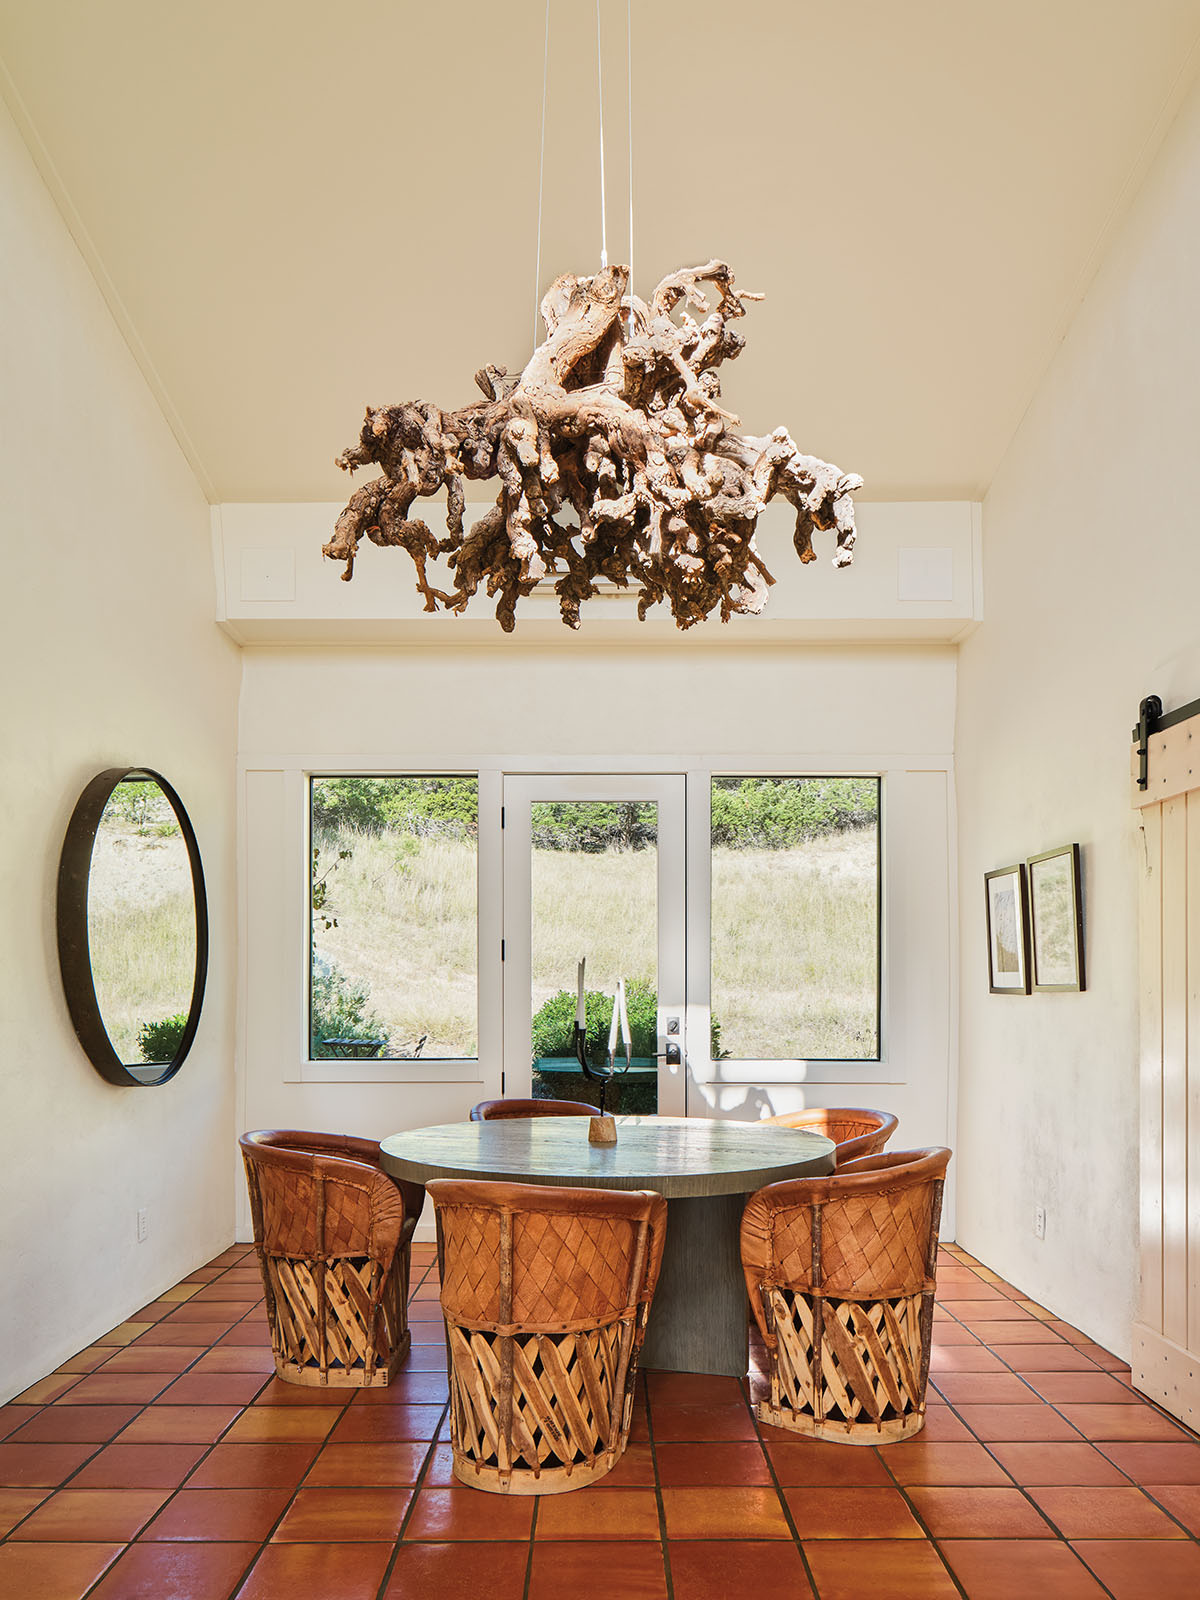 The interior of a room with wooden furniture and a large driftwood chandelier 